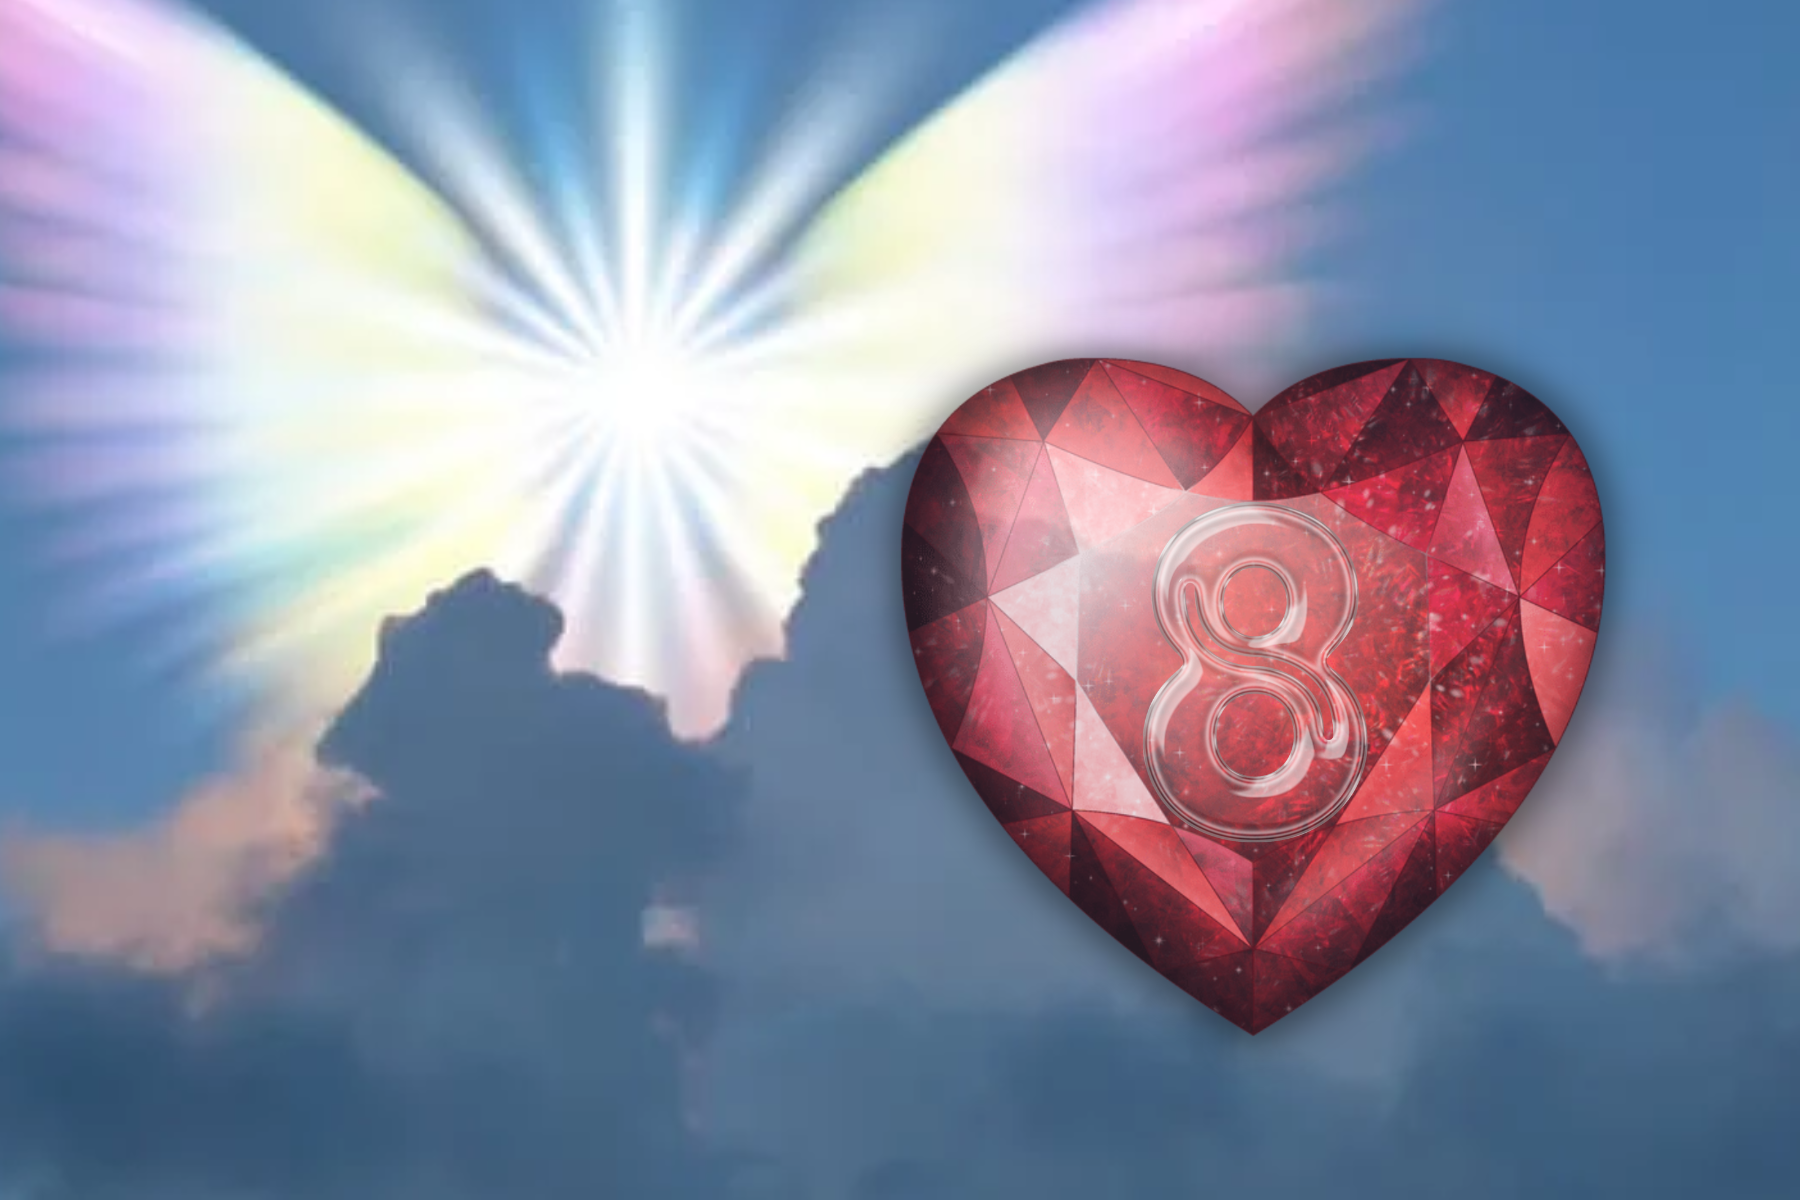 A heart-shaped garnet with the number 8 and a heart-shaped angel behind the clouds